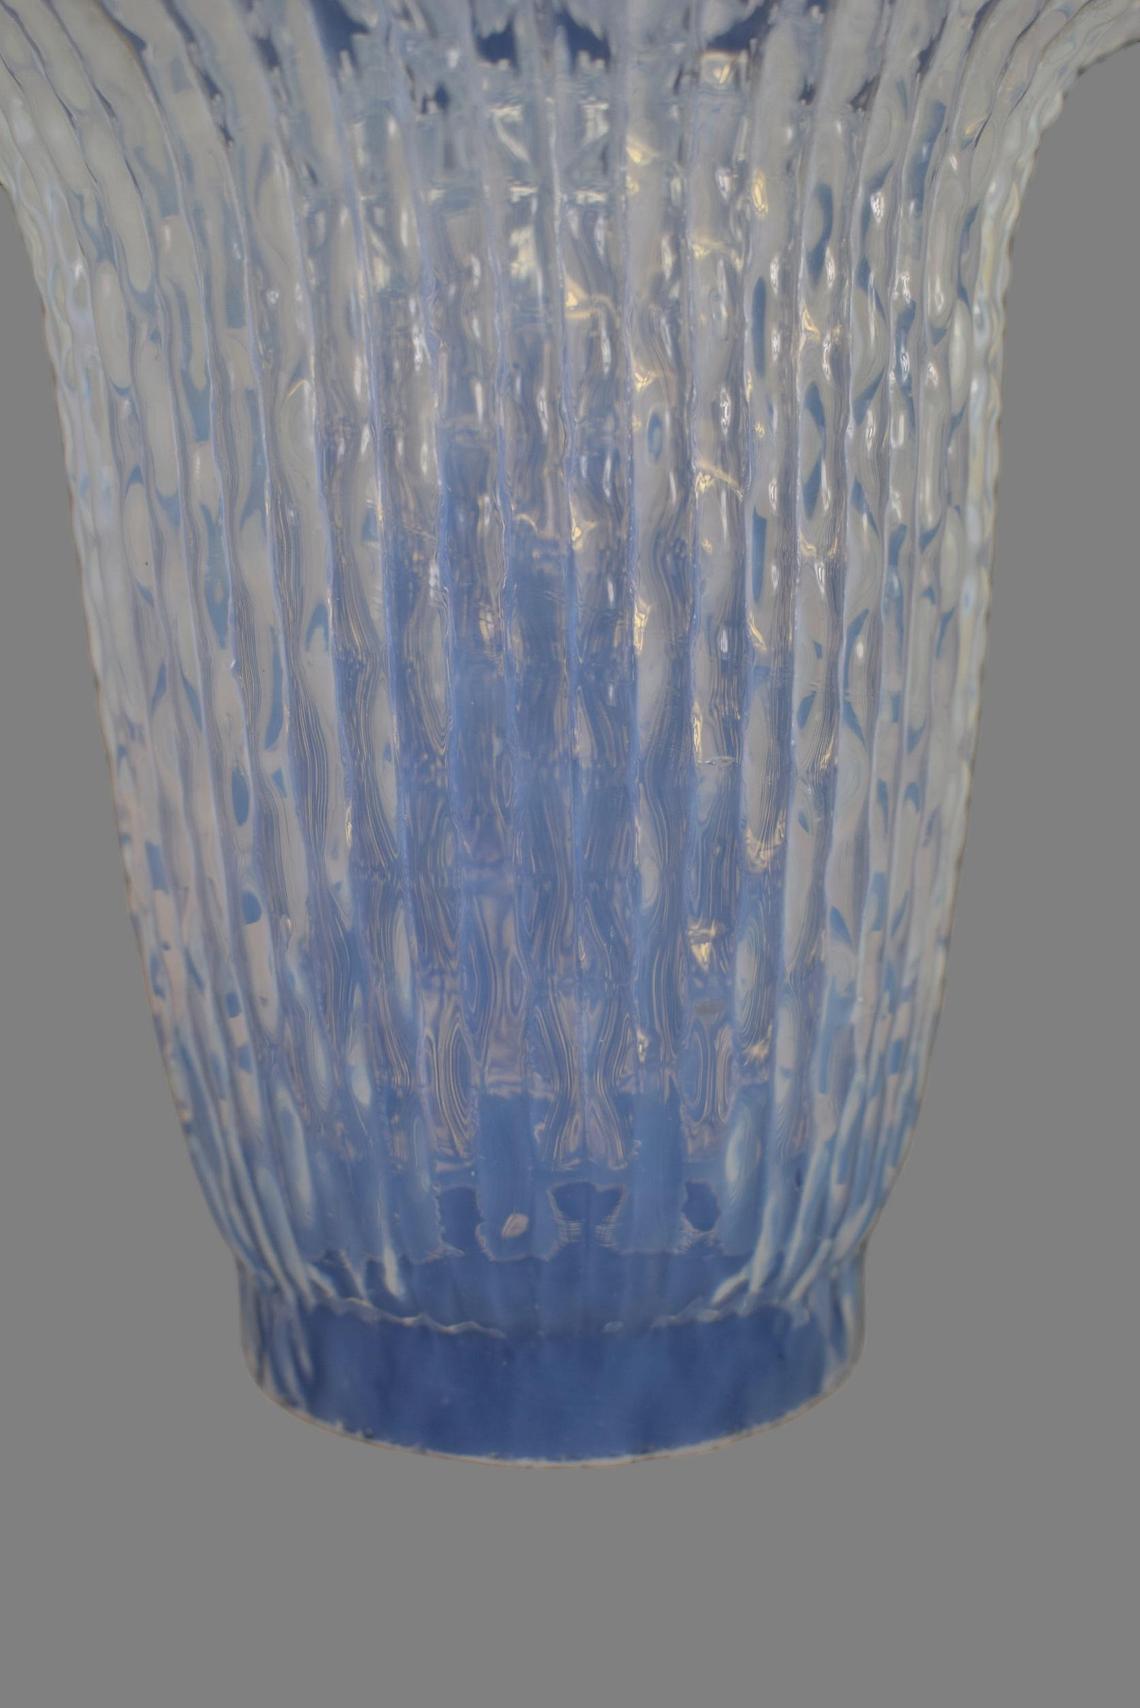  Antique Blue Glass Oil Lamp Shade Faceted Opalescent Glass Lamp Shade